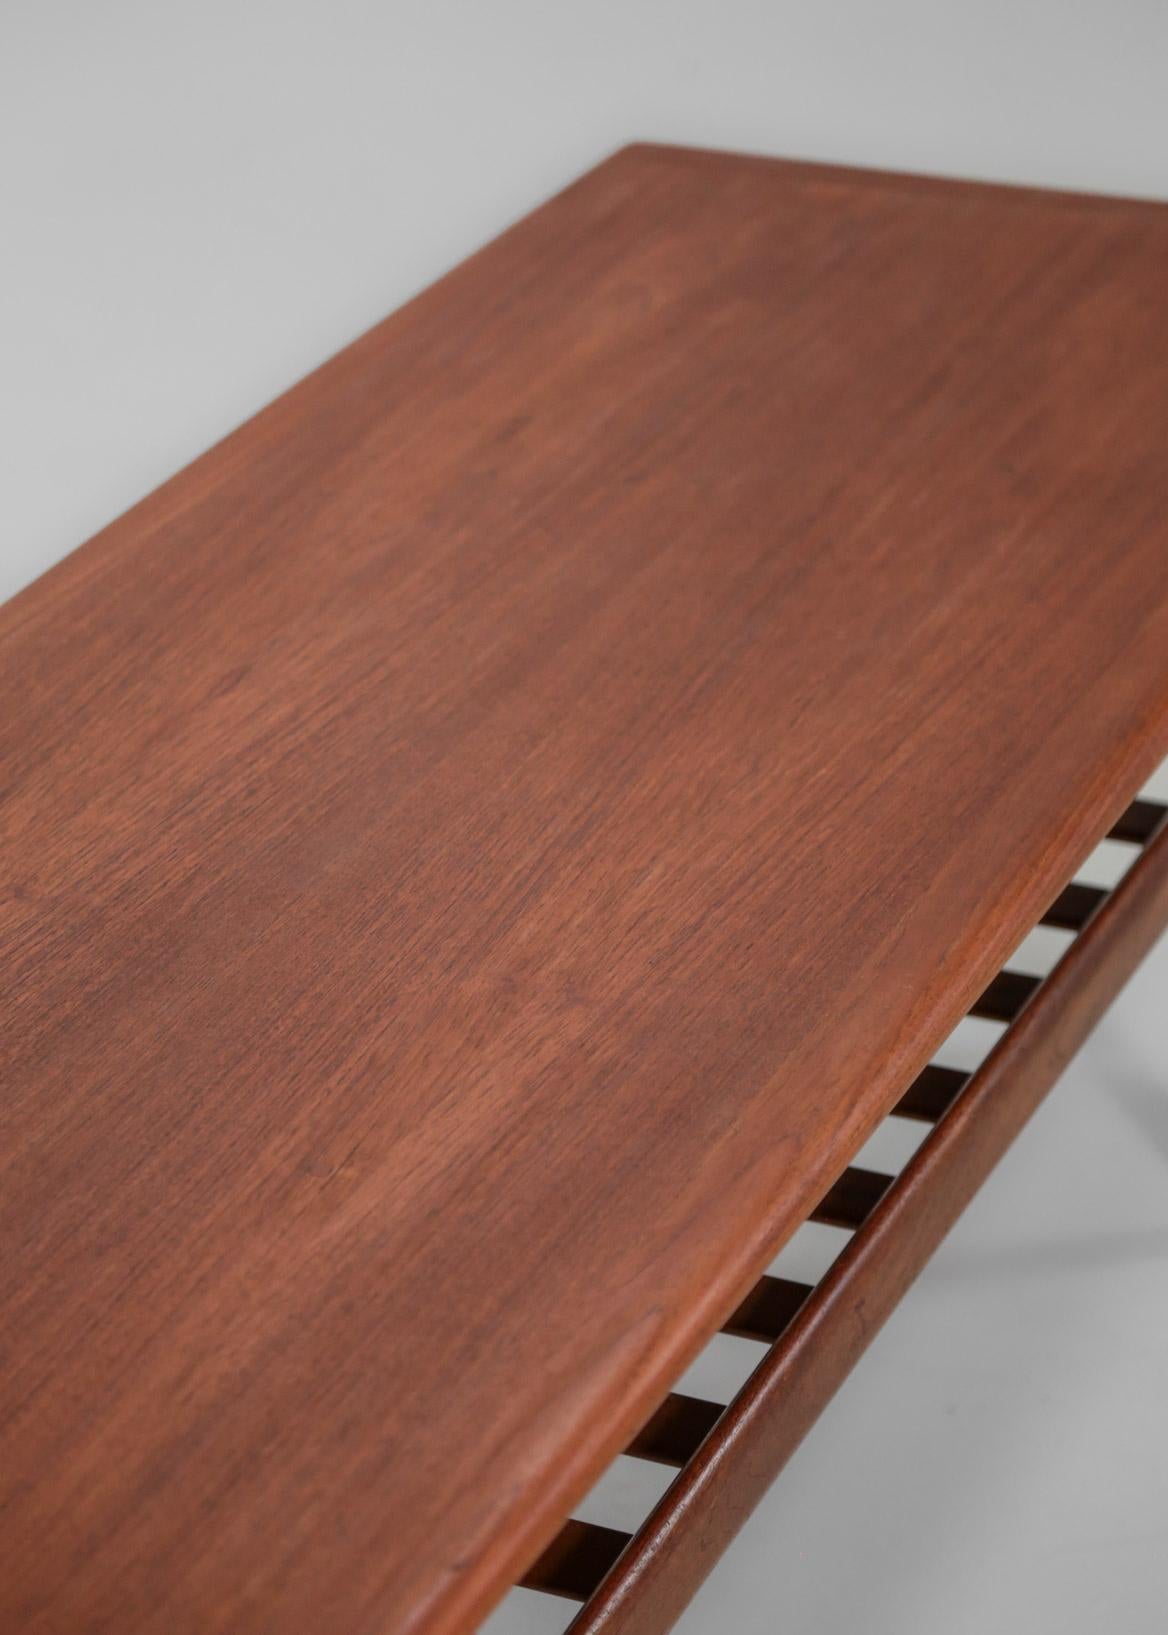 Teak Danish Coffee Table by Grete Jalk for Glostrup